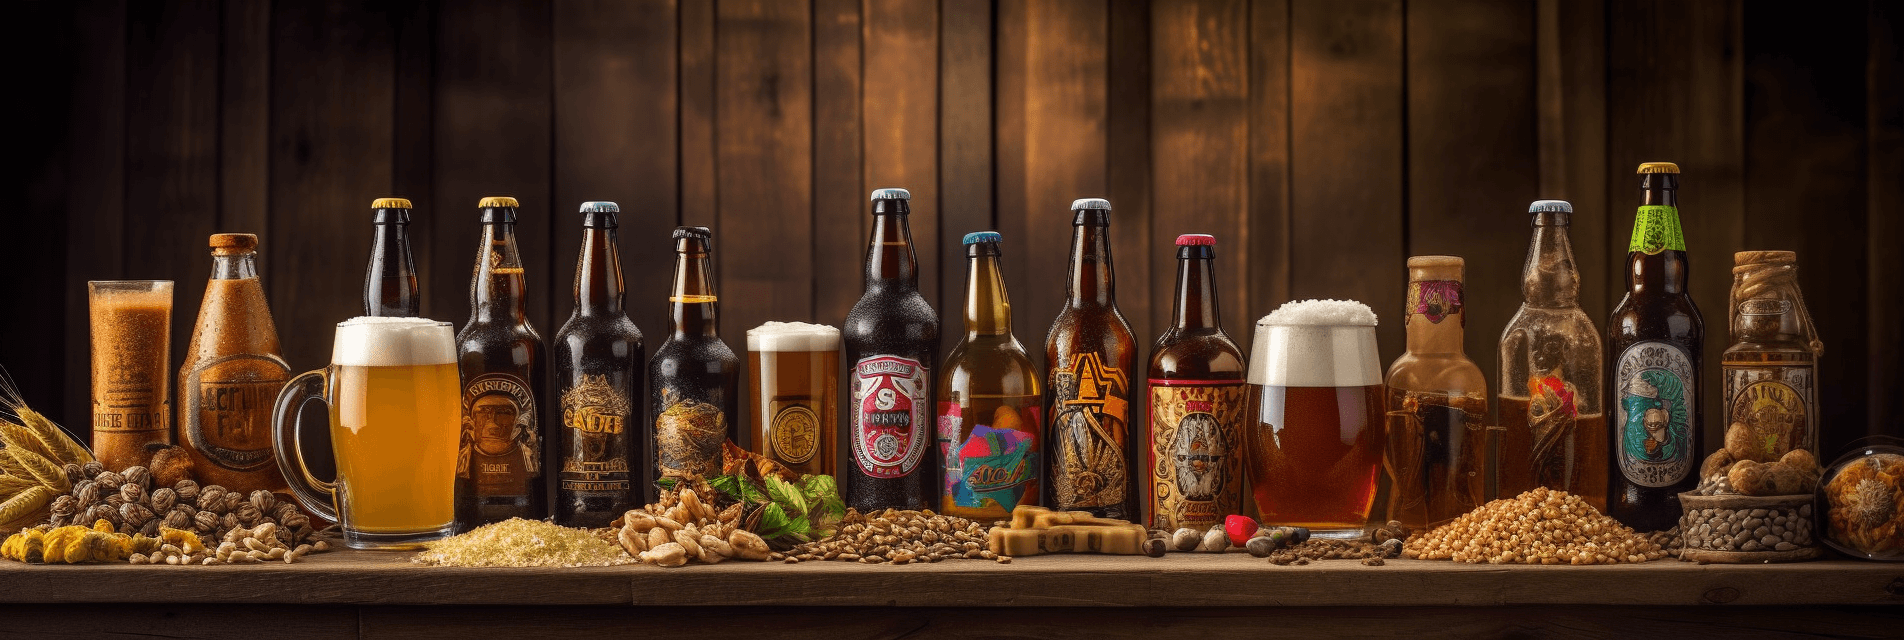 Array of Craft Beer Marketing and Packaging